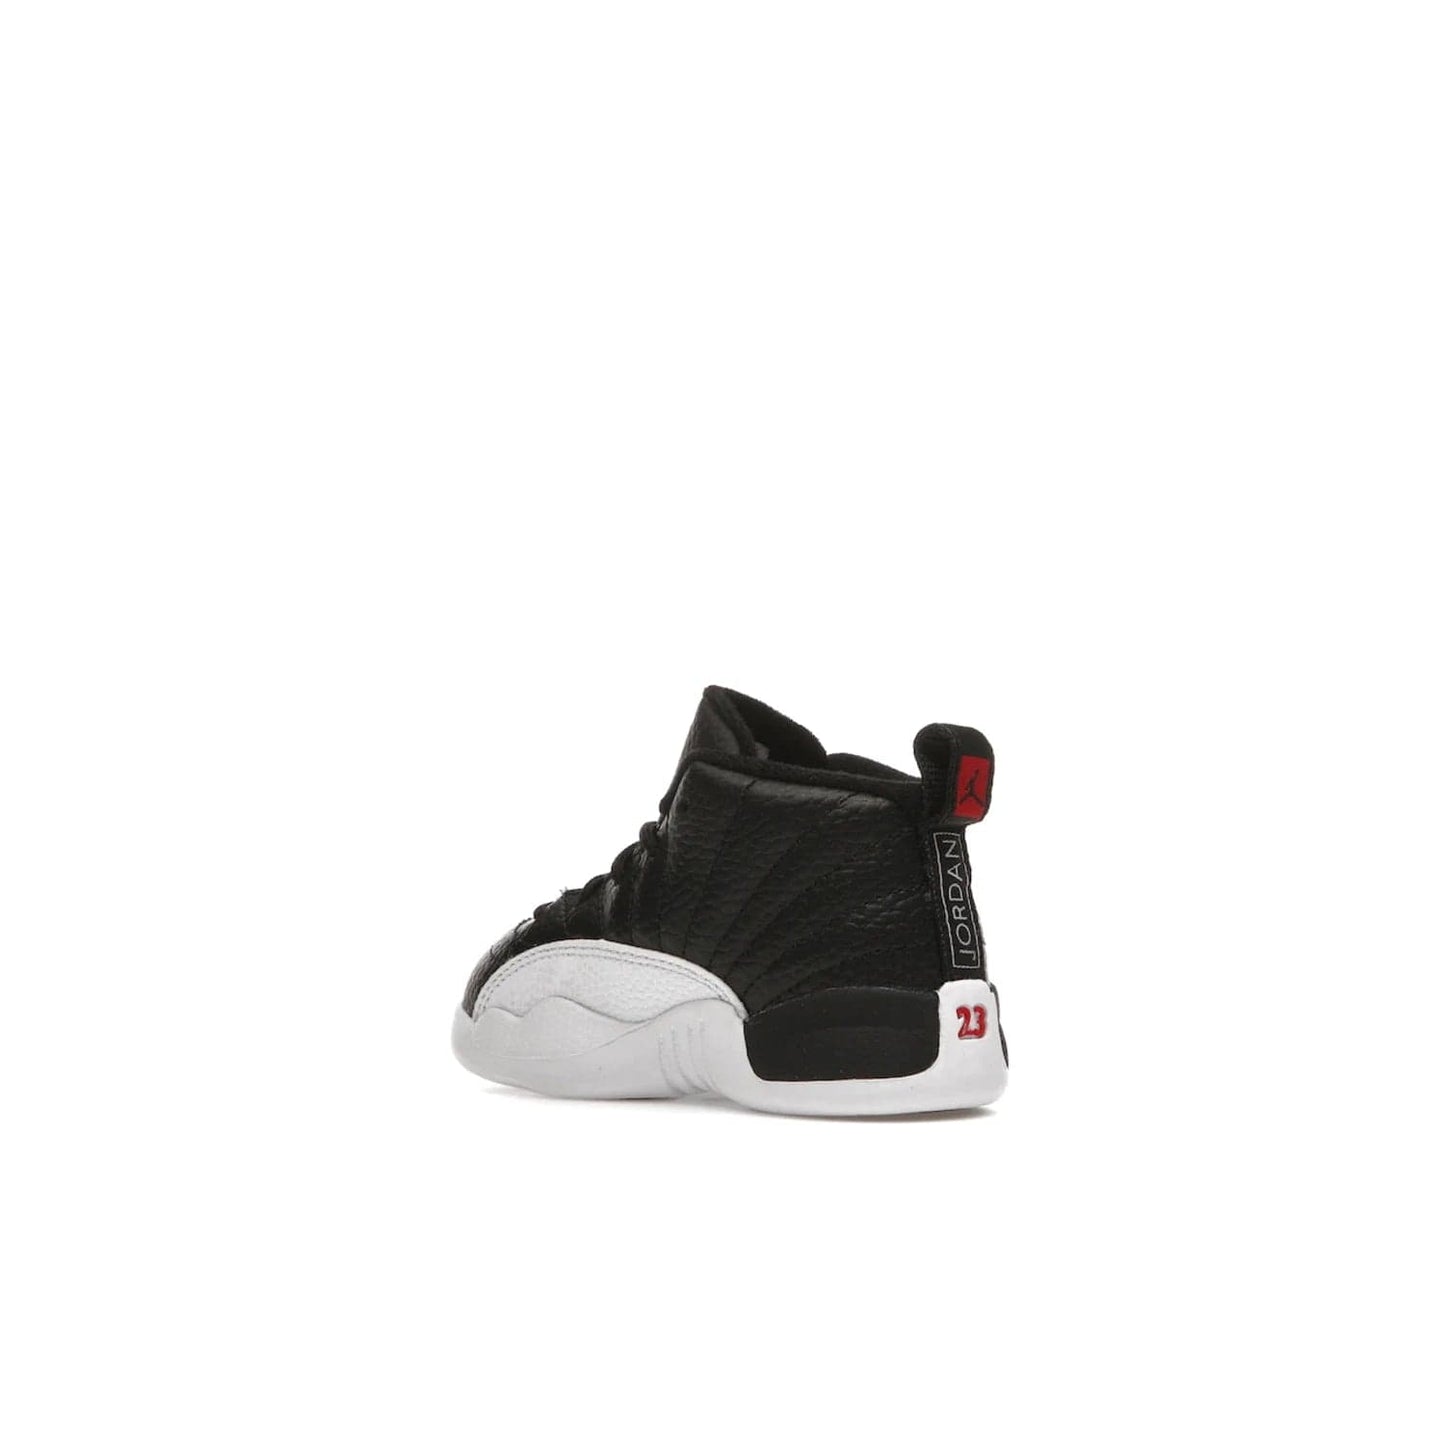 Jordan 12 Retro Playoffs (2022) (TD) - Image 23 - Only at www.BallersClubKickz.com - Stay stylish with the Air Jordan 12 Retro Playoffs 2022 (TD) toddler shoe. All-black upper with red and white accents plus subtle gold details. Bright white midsole and sole. Perfect for any outing or special event.